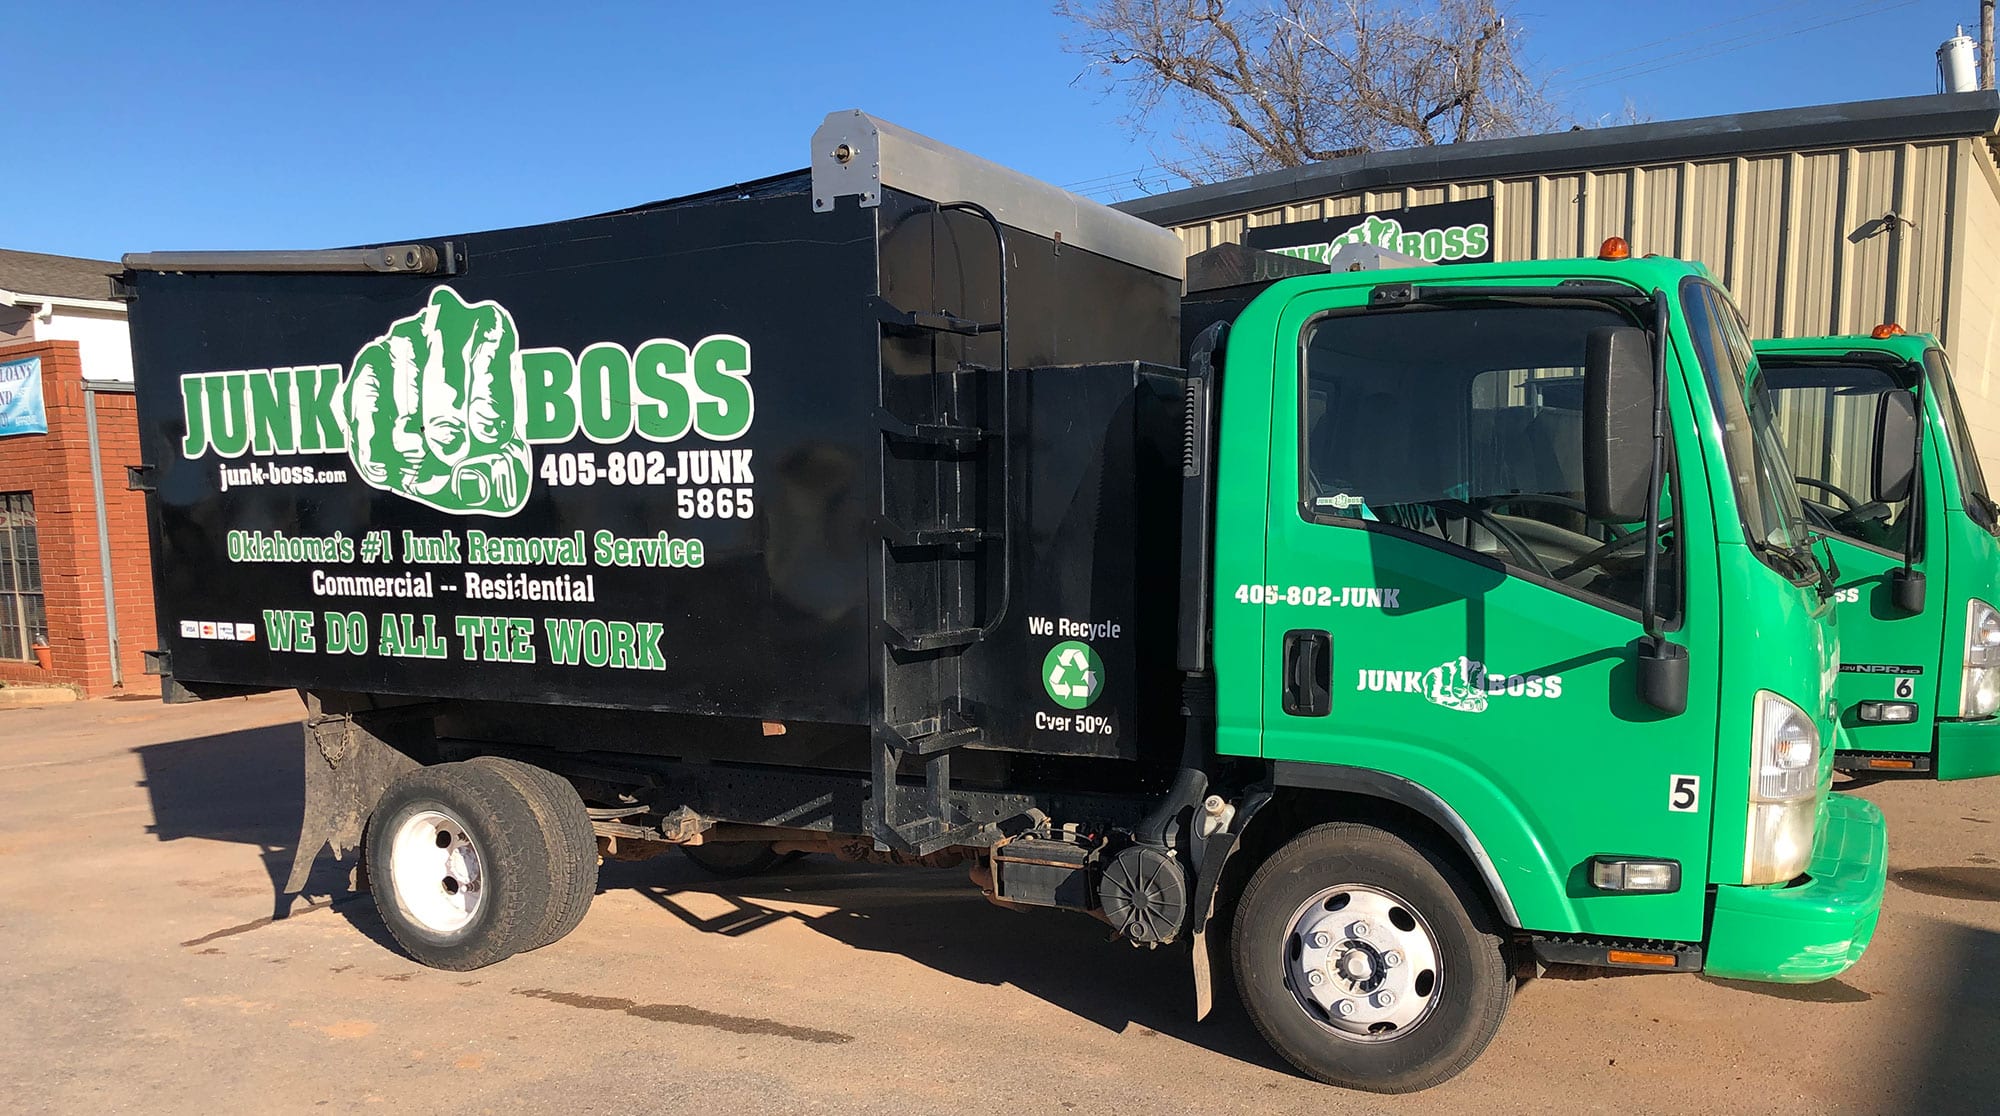 Junk Boss Service Vehicles Used To Deliver Dumpsters